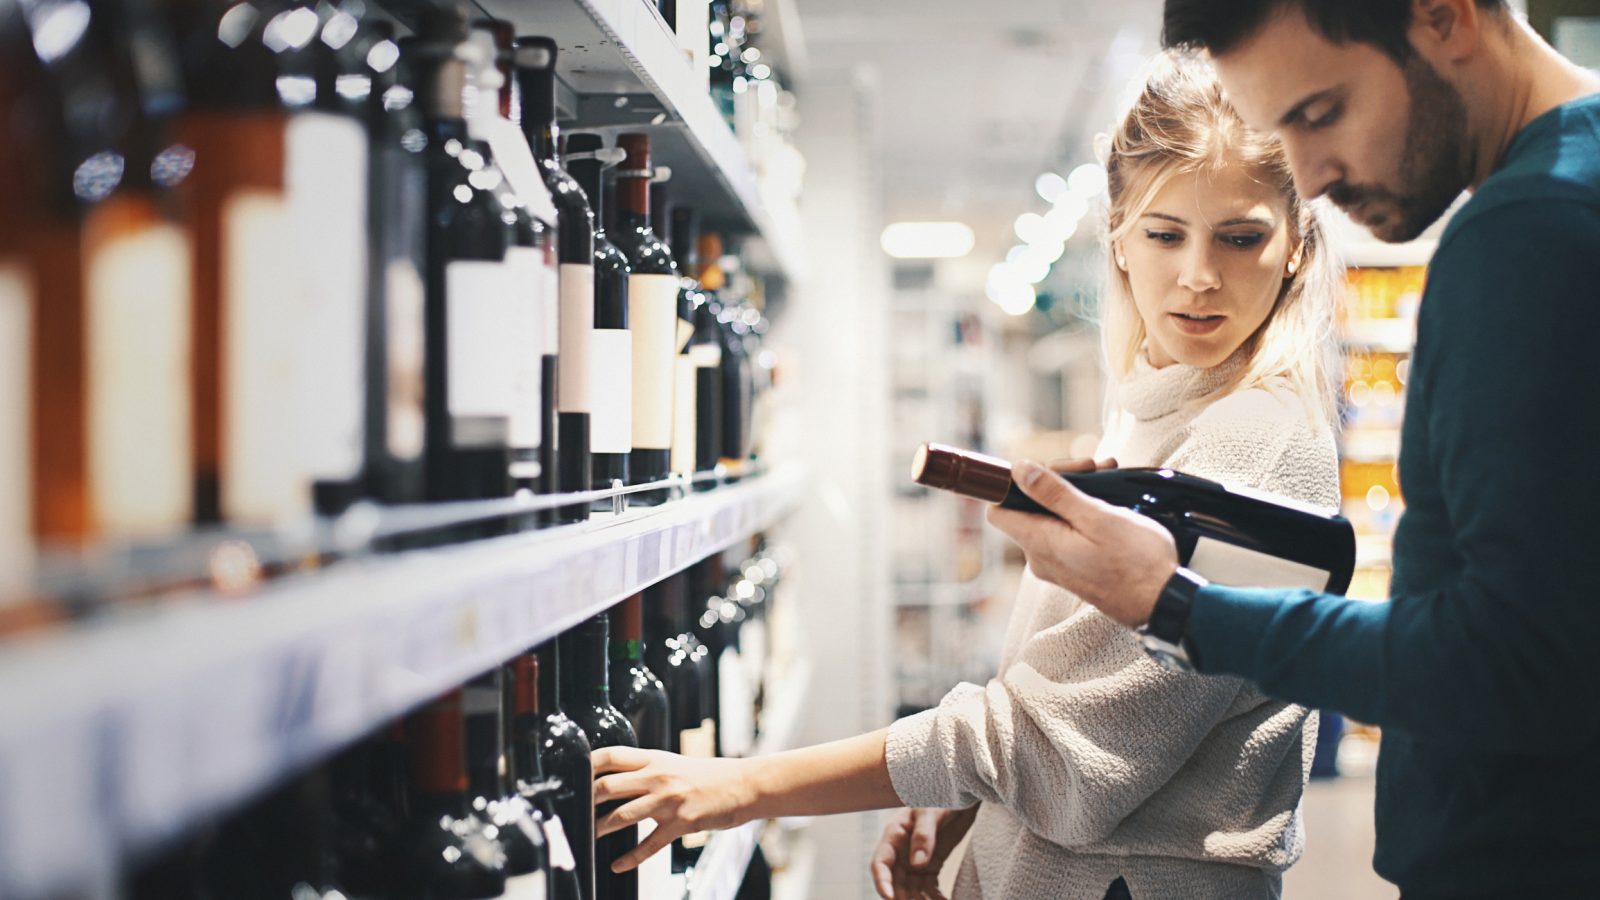 A man and woman stand in front of store shelves filled with wine bottles. The man is holding a bottle and looking at the label.